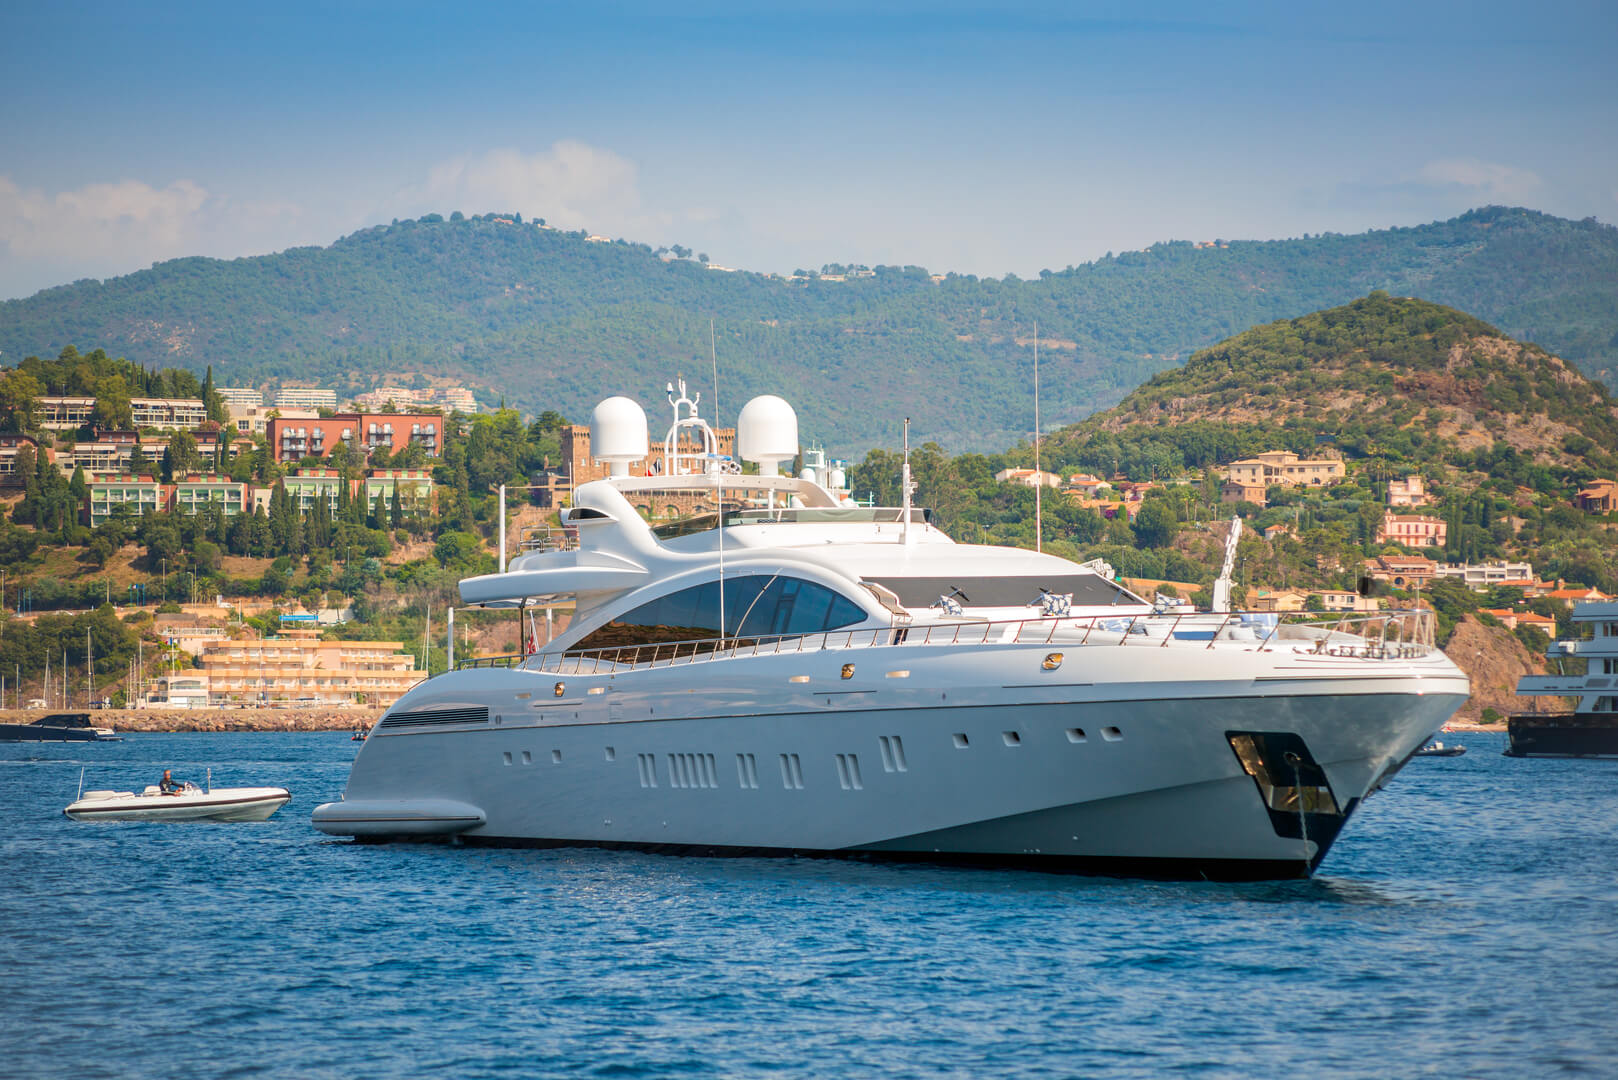 Big white motor yacht anchored in the bay of Cannes, France during summertime with cushions on the top deck for entertainment of guests